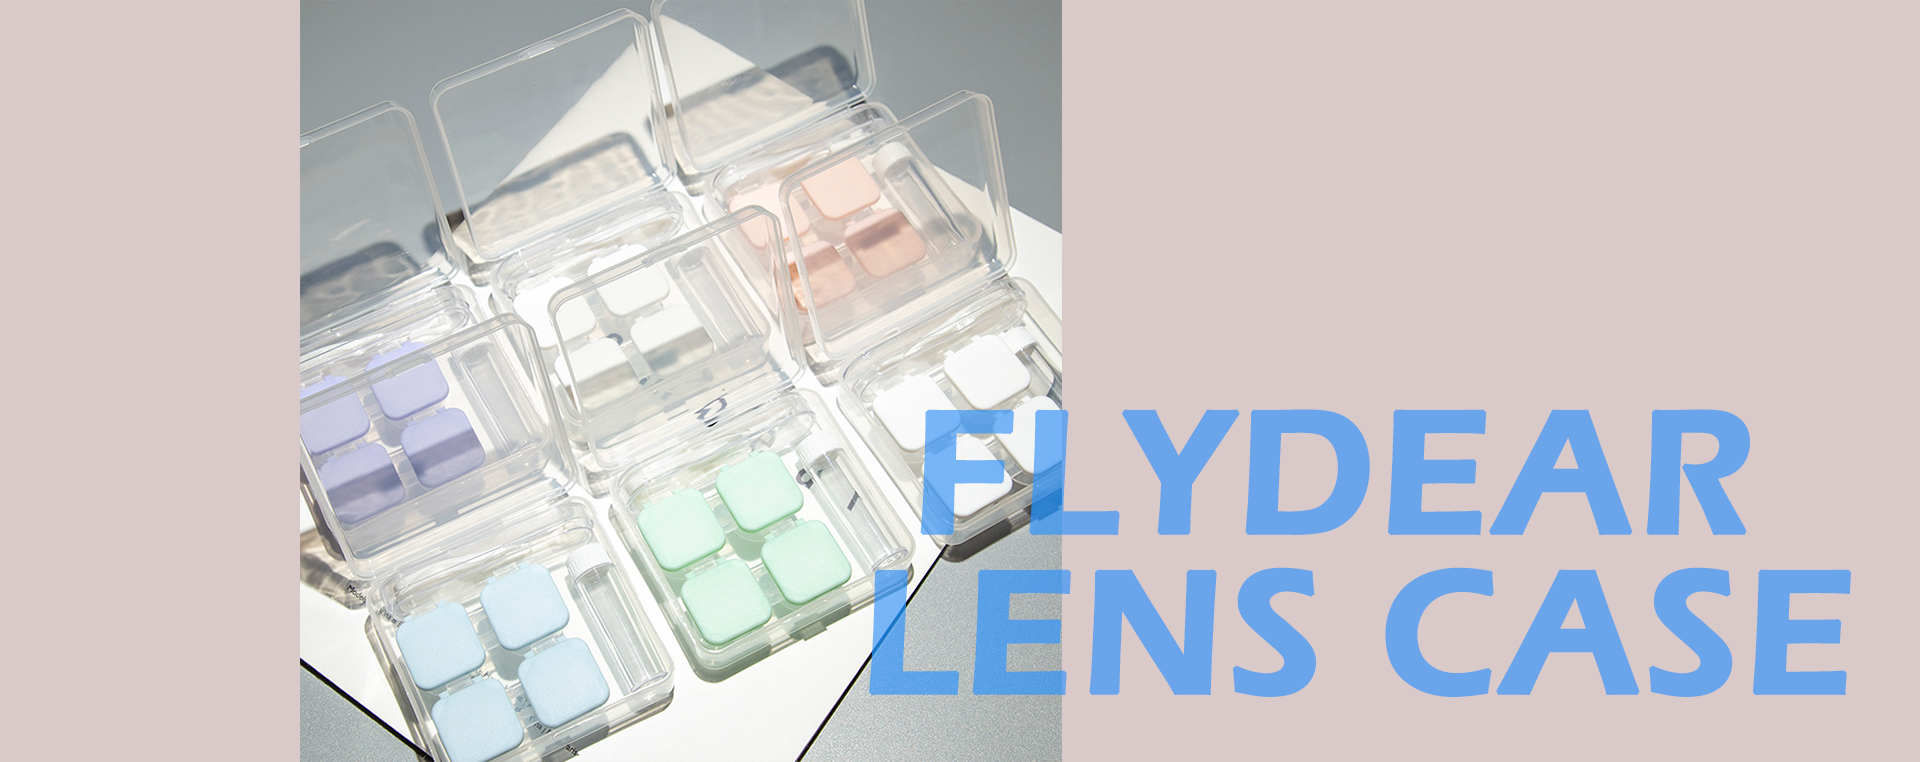 FlyDear Colored Contacts Lens Case 2 Pack